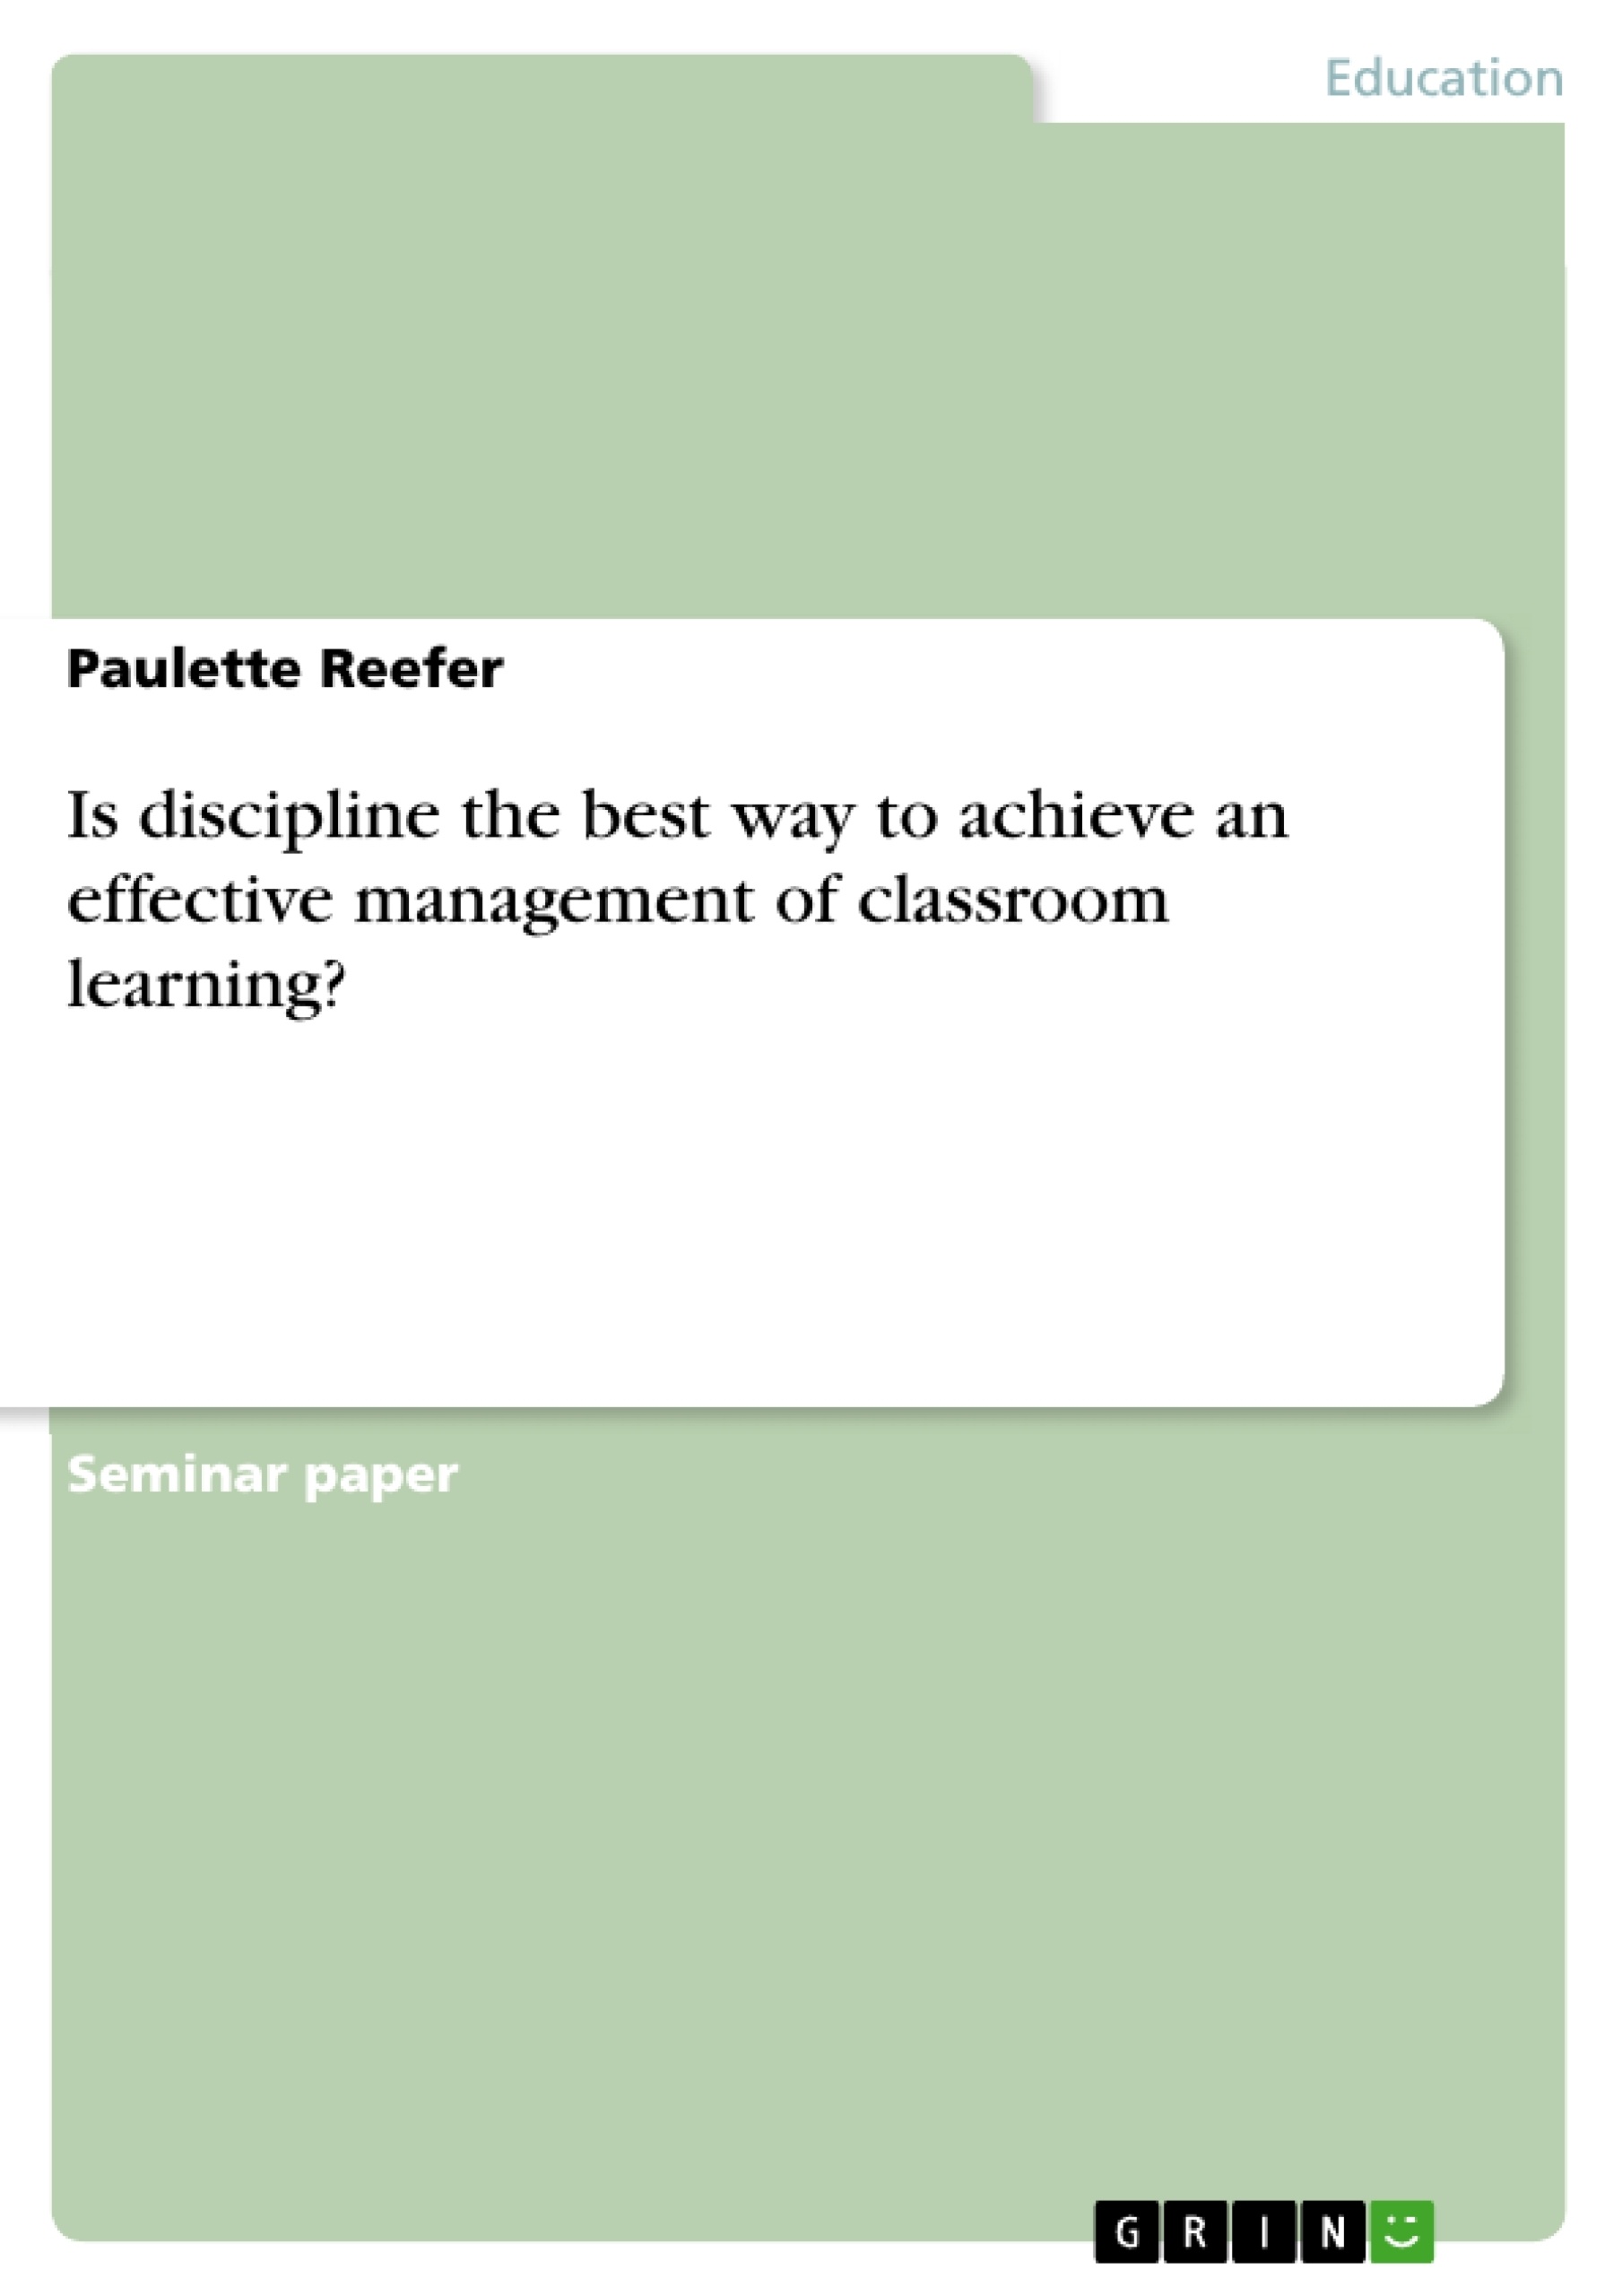 Title: Is discipline the best way to achieve an effective management of classroom learning?